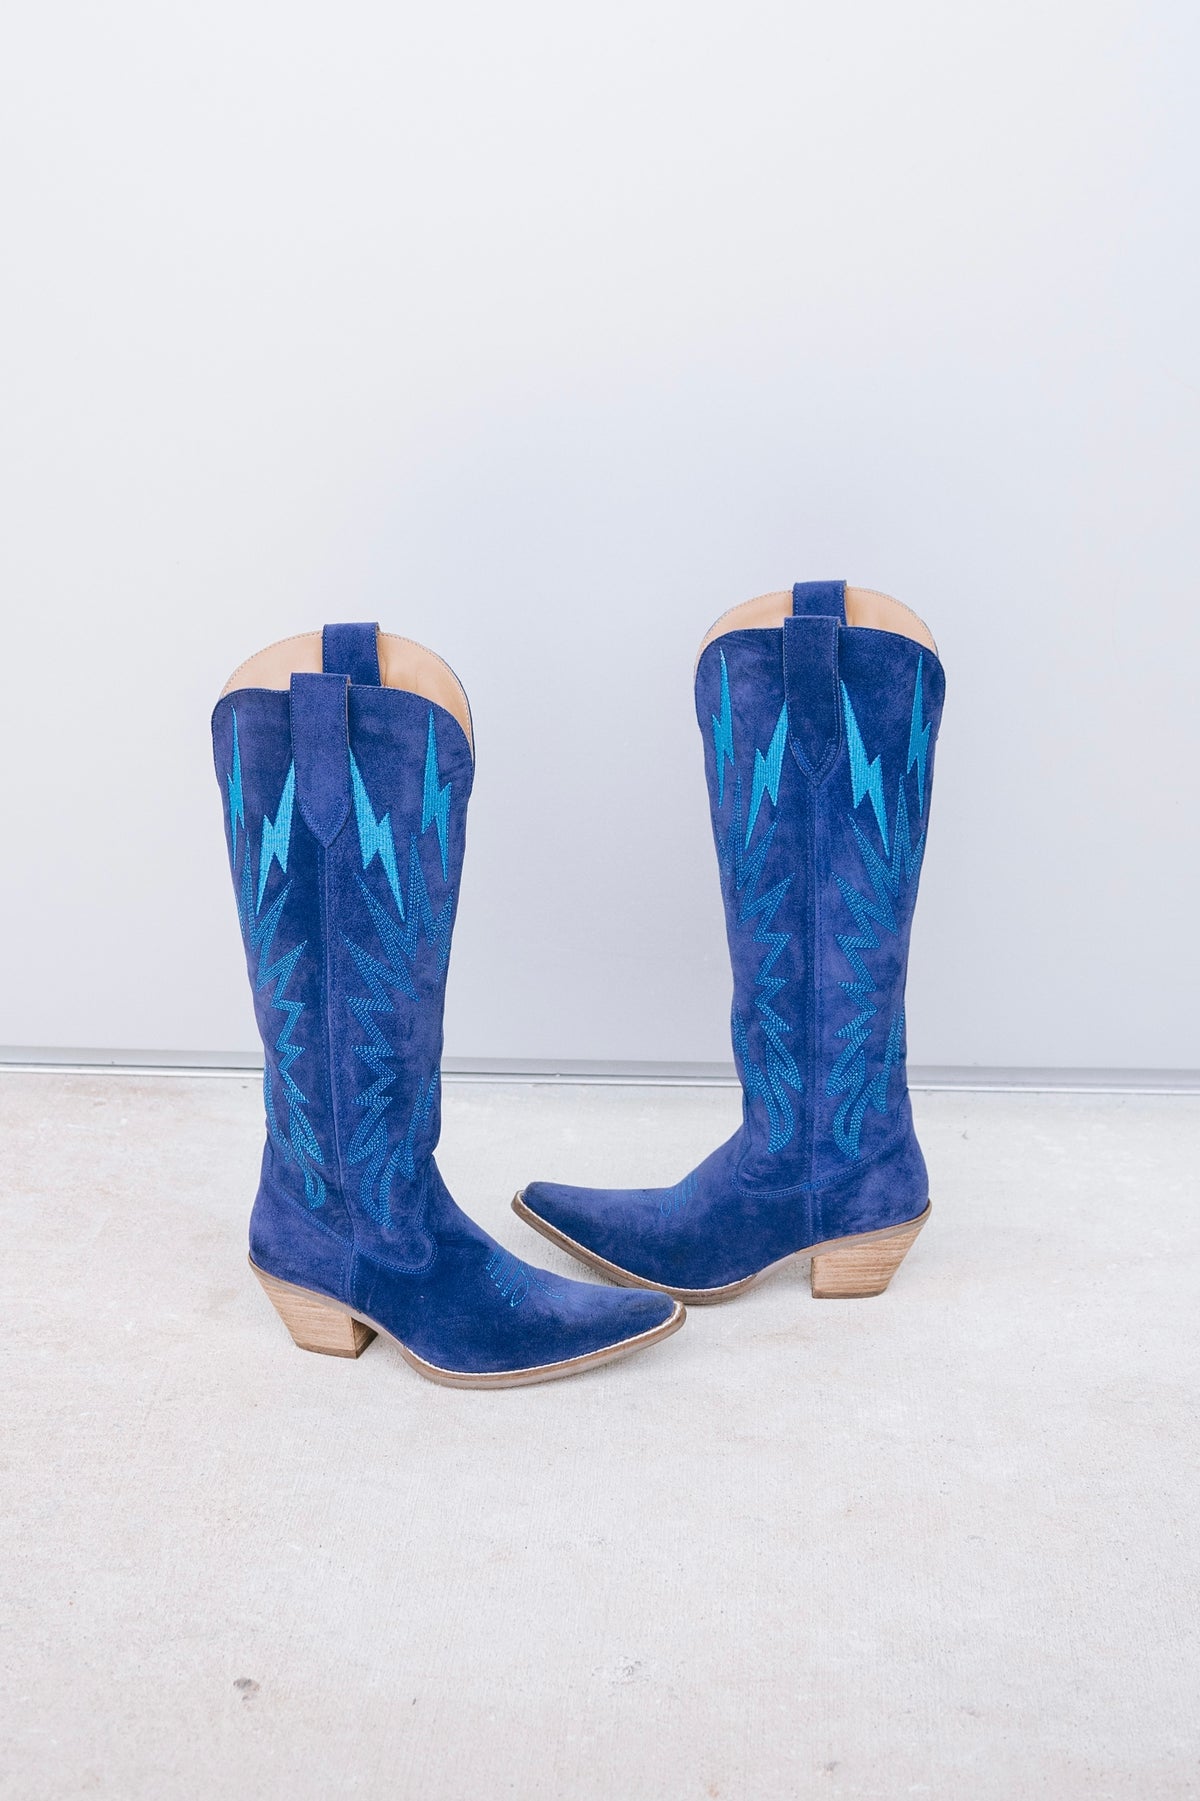 Thunder Road Leather Boot in Blue